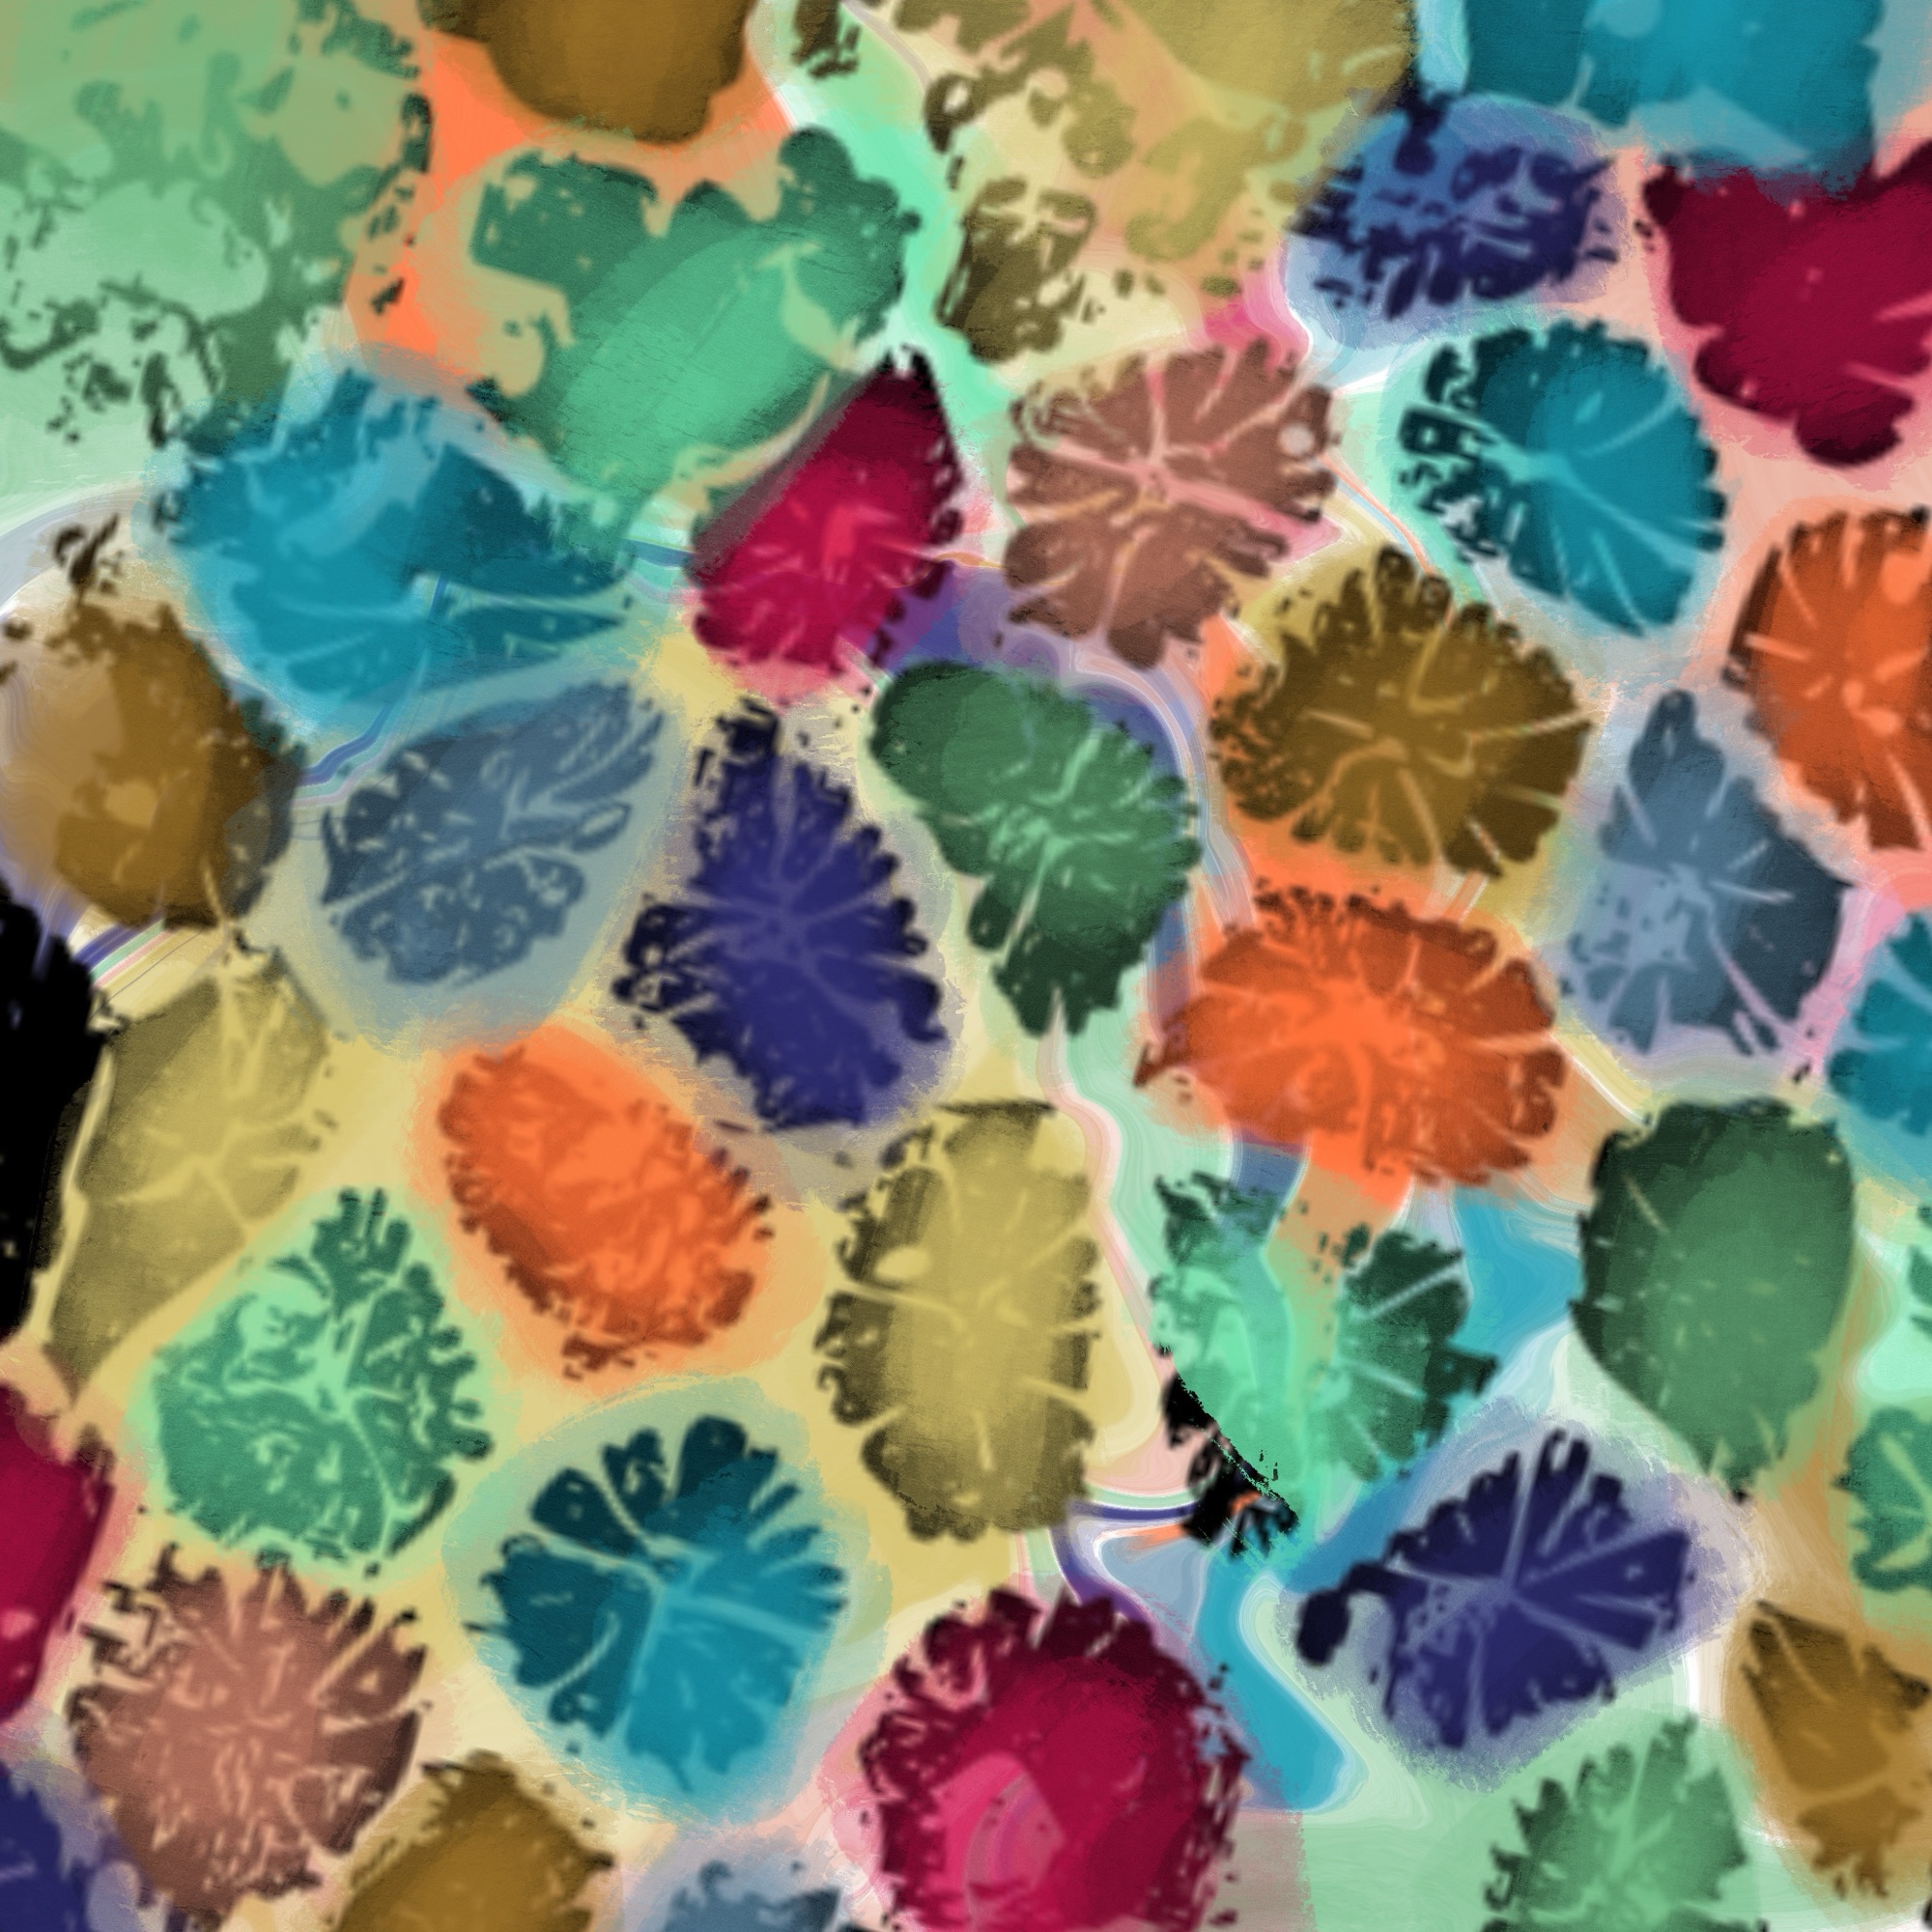 Isastrea oblonga coral, digitally colourised by artist Nicki MacRae. Star-like cells tessellate into a constellation pattern and are tinted in vivid hues.